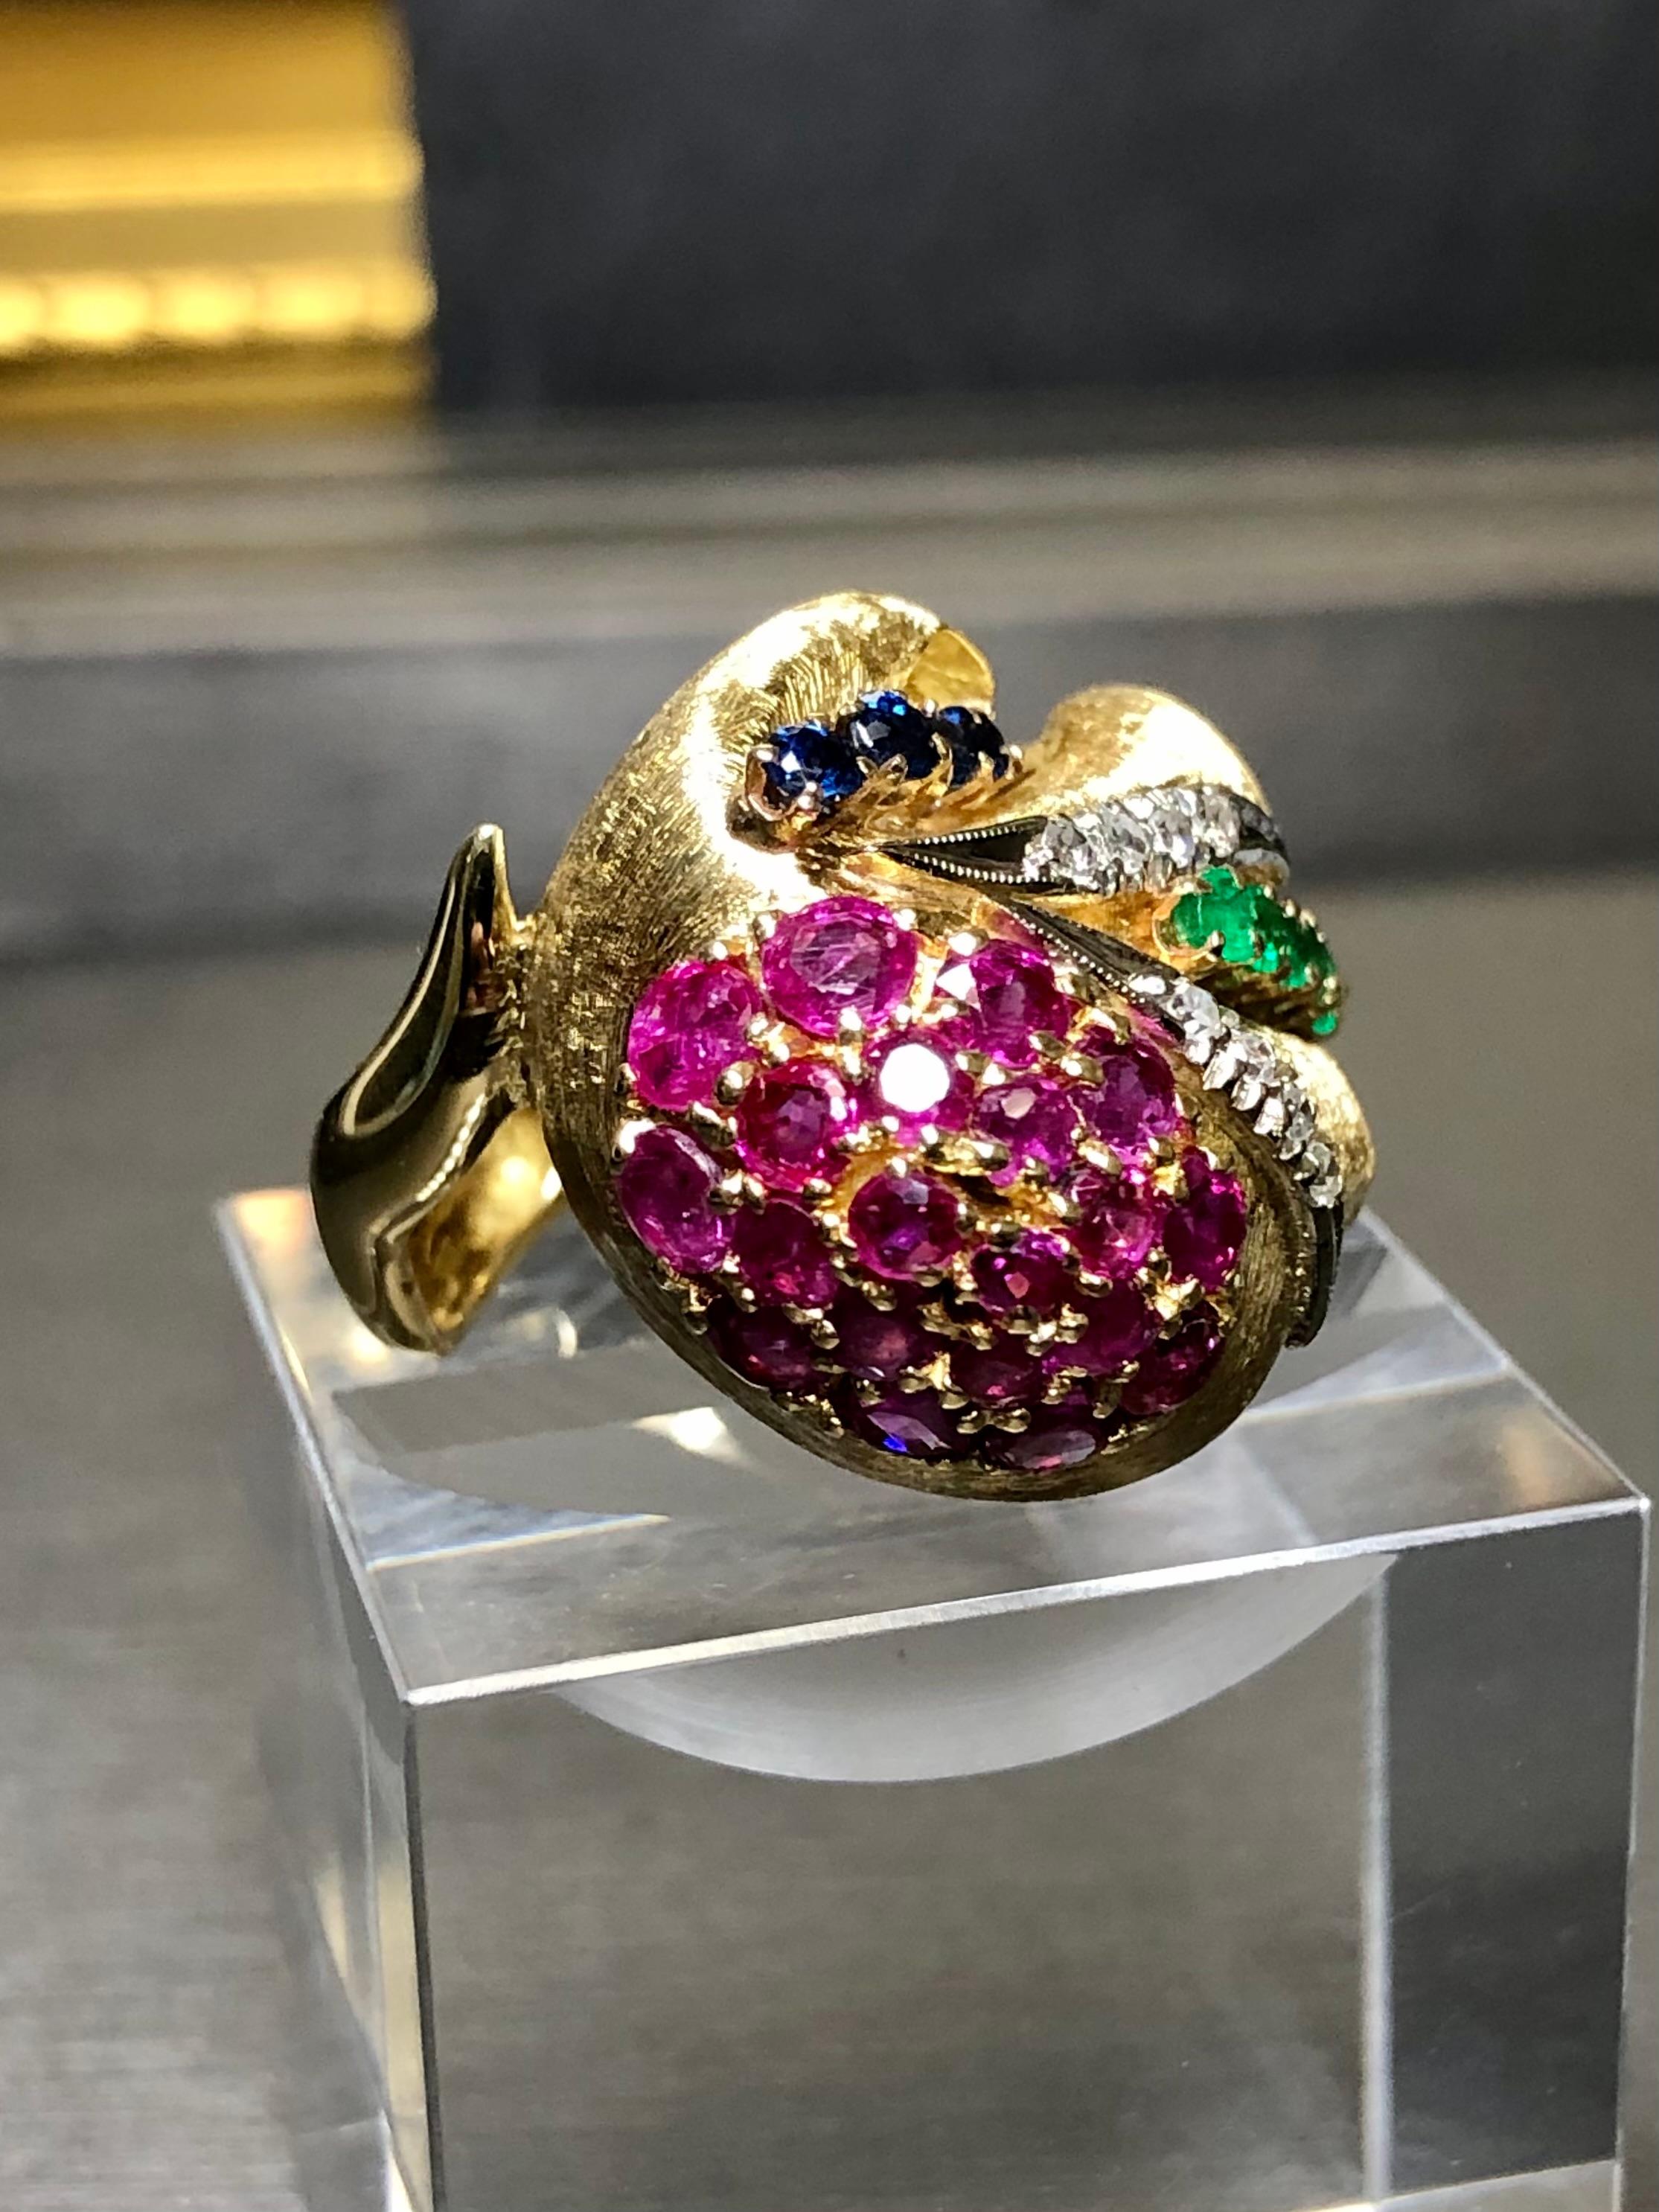 
An absolutely fabulous free form design cocktail ring by none other than than one of our favorite American jewelry houses, Spitzer + Furman (signed and numbered). It has been hand crafted in 18K yellow gold and set with approximately 2.30cttw in